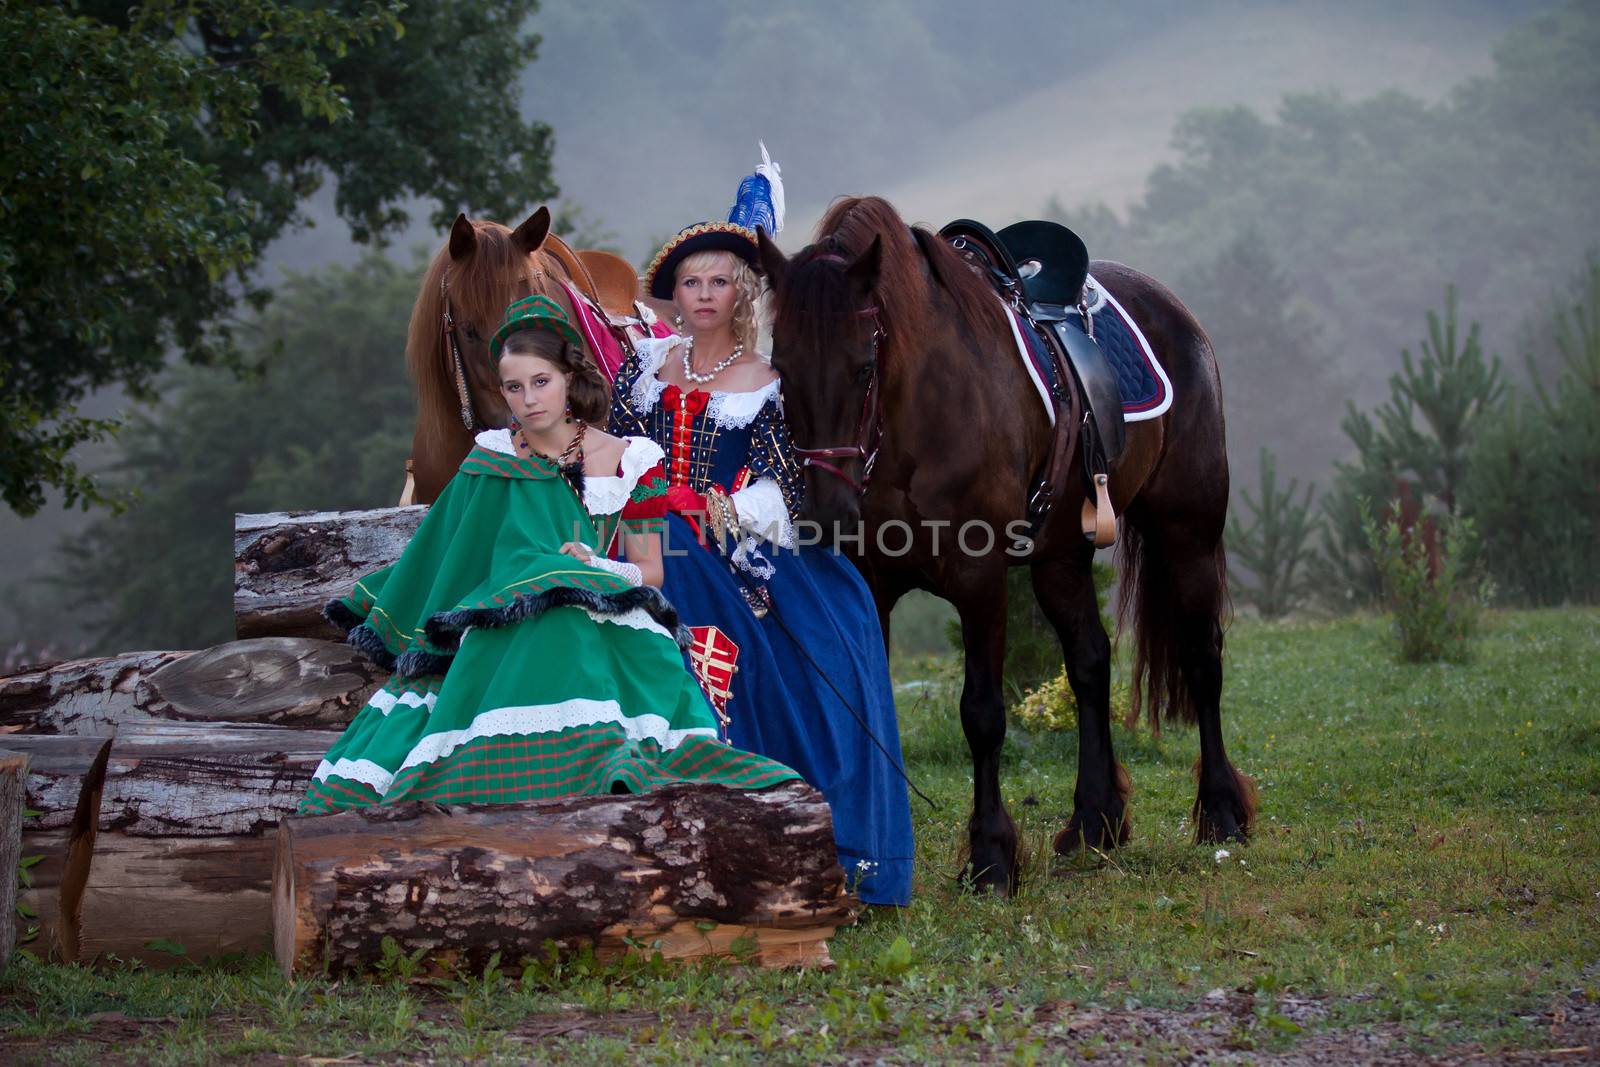 Two women in the royal baroque dress, sitting next to the horses in the fog